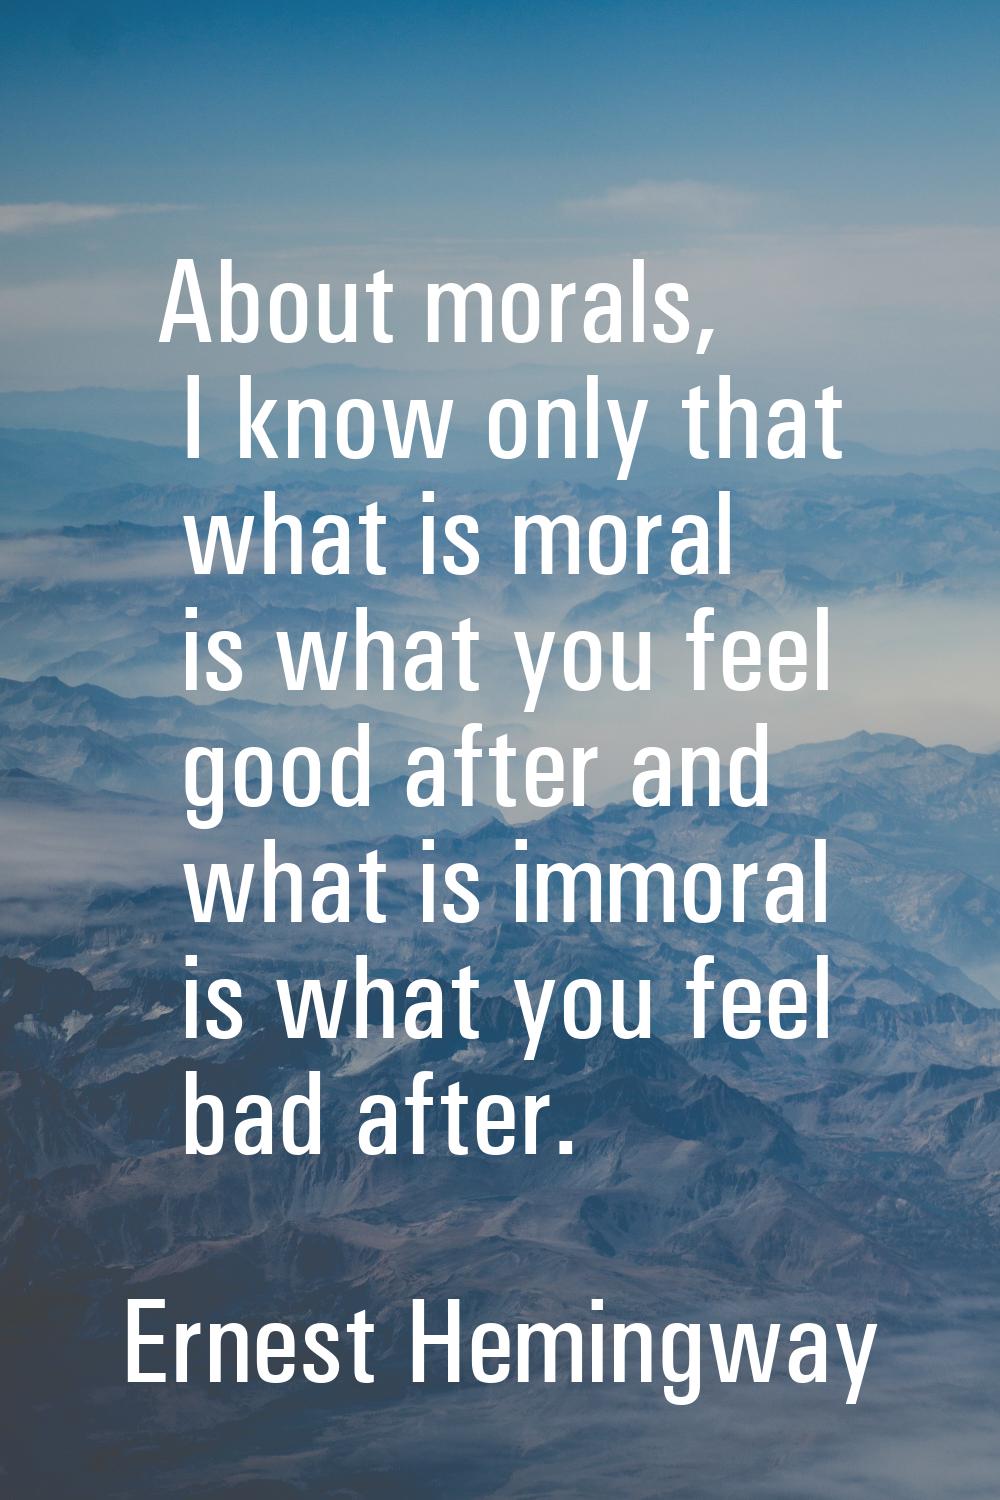 About morals, I know only that what is moral is what you feel good after and what is immoral is wha